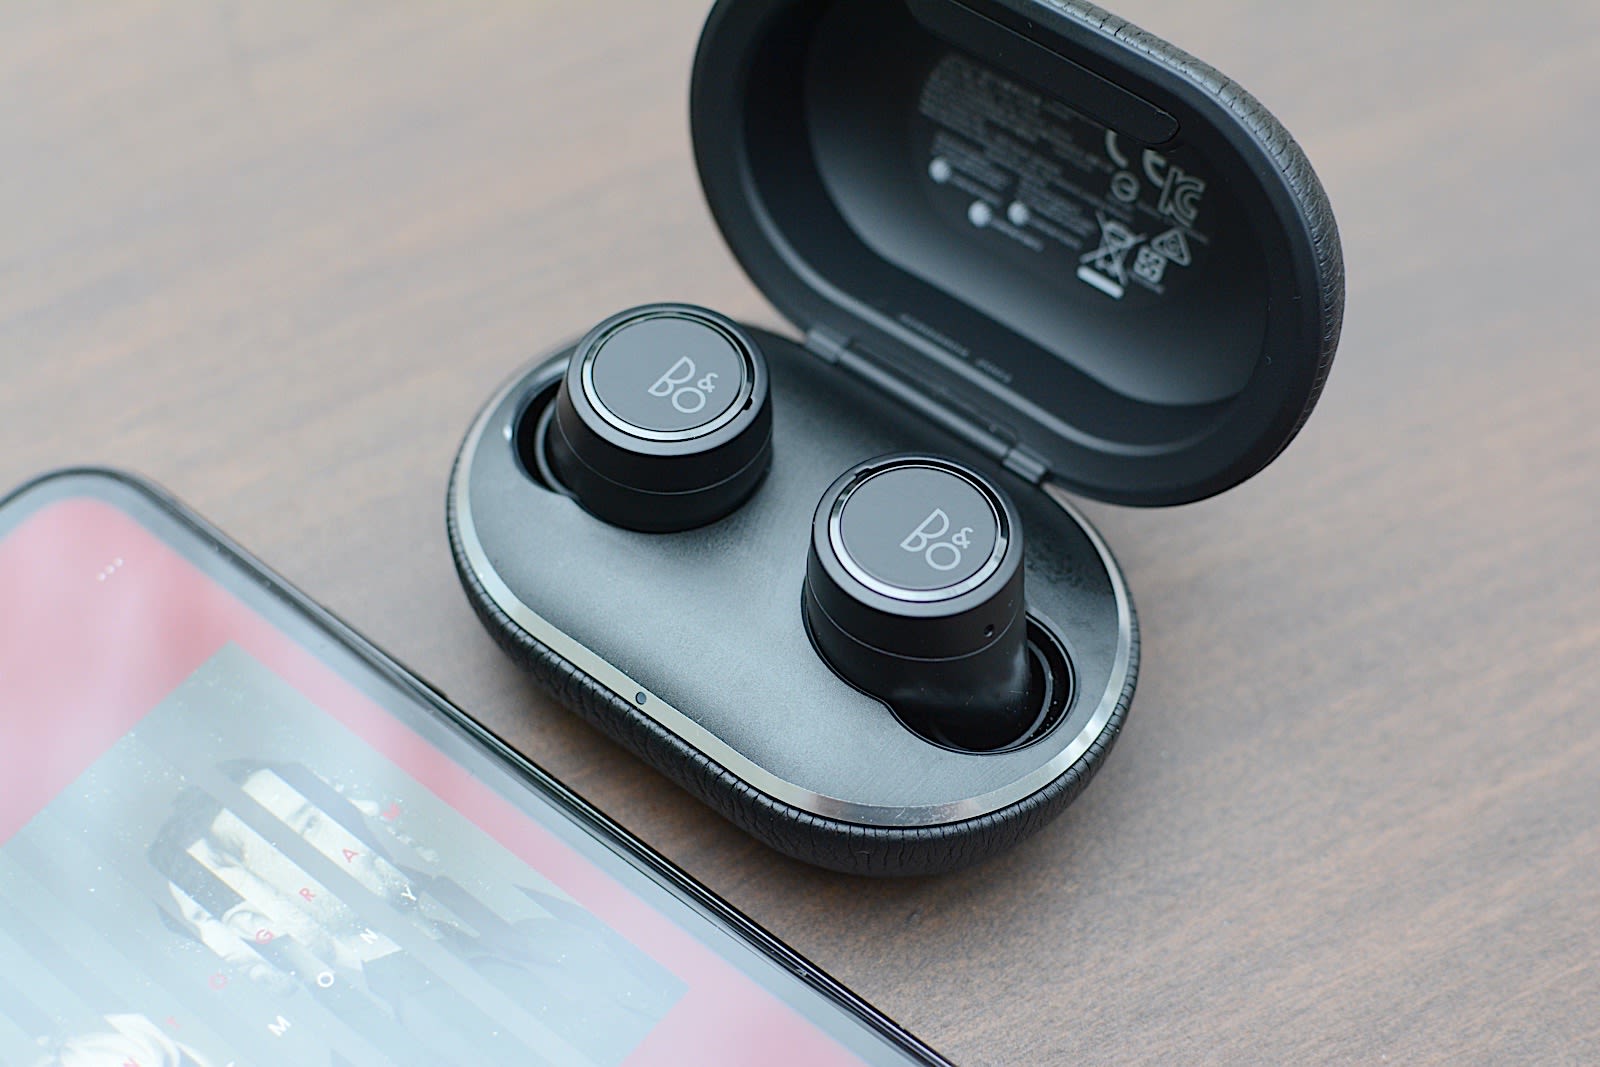 Bang & Olufsen Beoplay E8 true wireless earbuds review